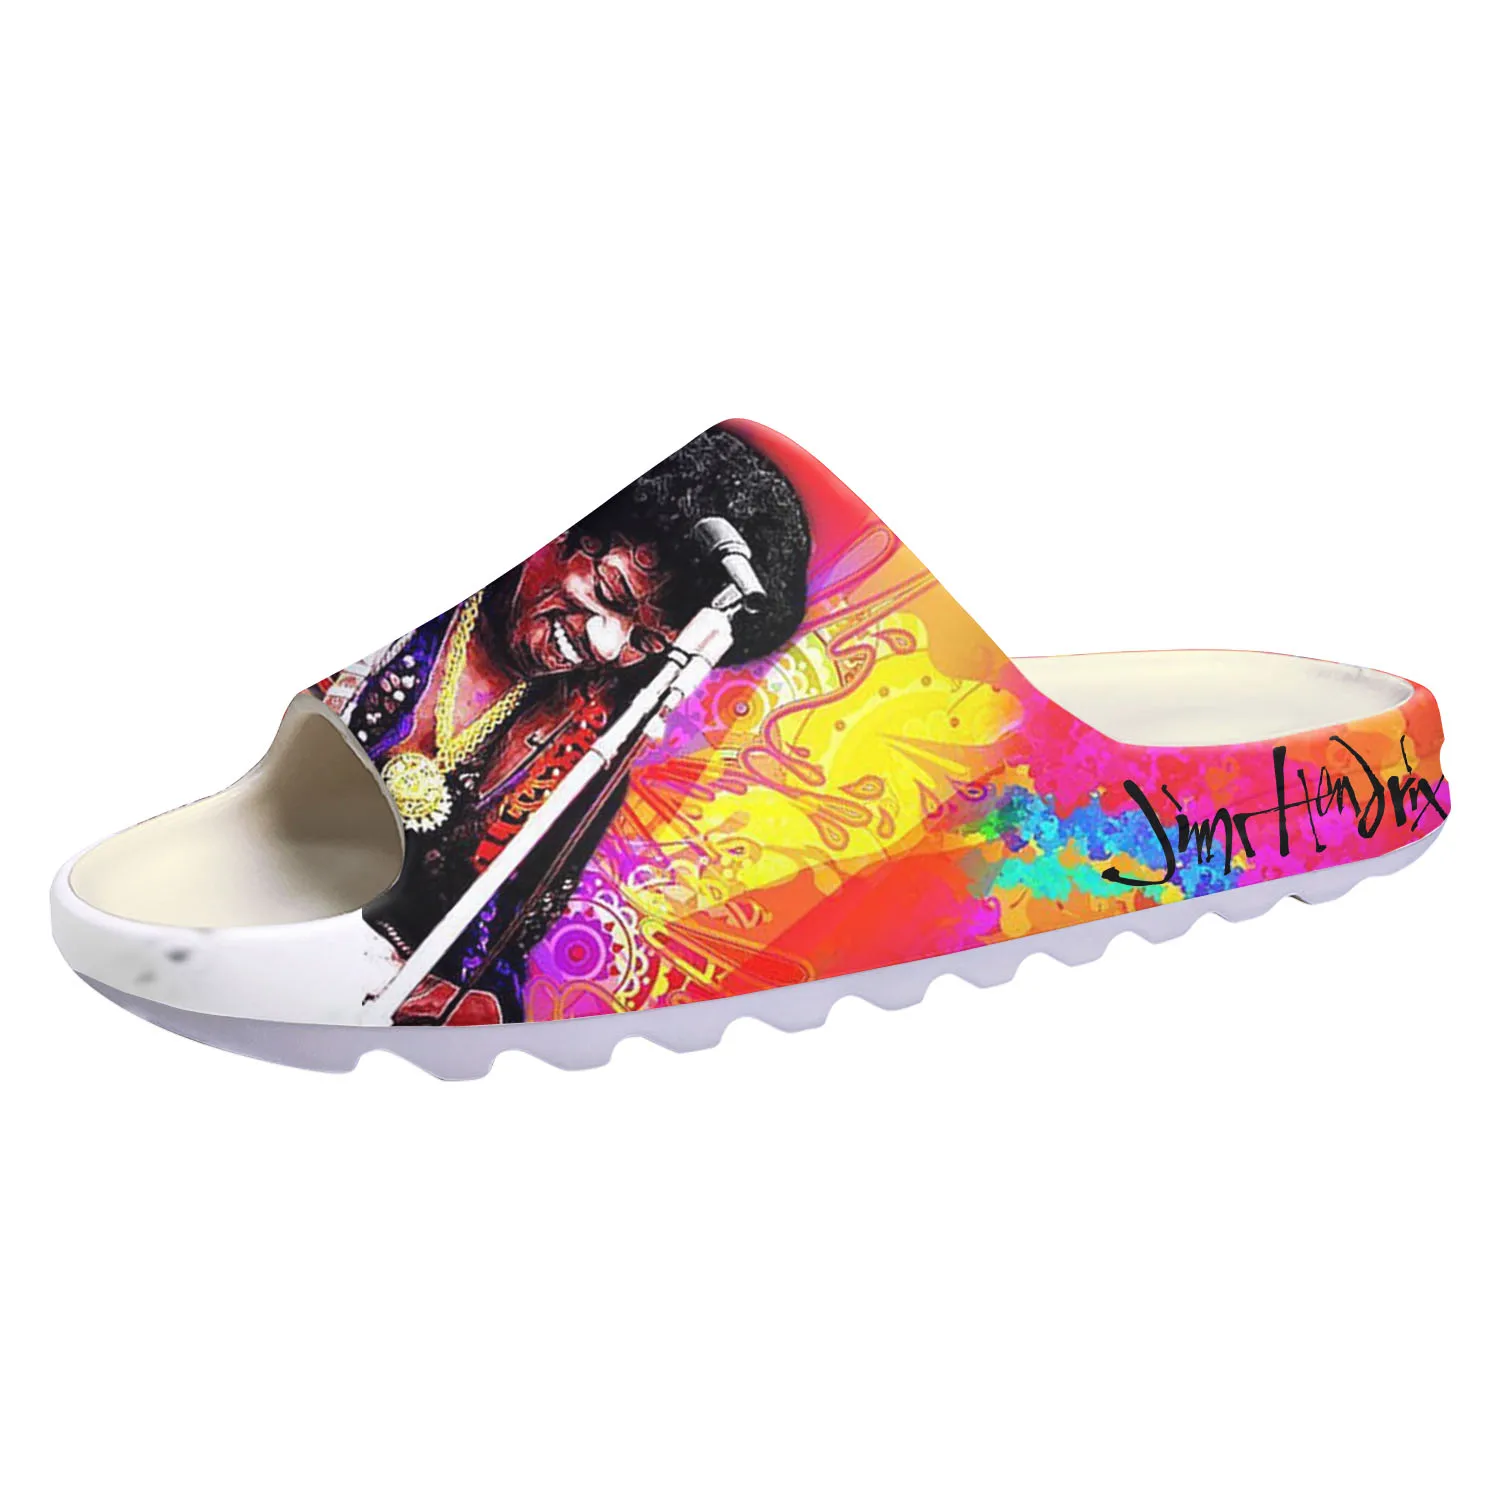 

Jimi Hendrix Guitarist Soft Sole Sllipers Home Clogs Step on Water Shoes Mens Womens Teenager Customize on Shit Beach Sandals